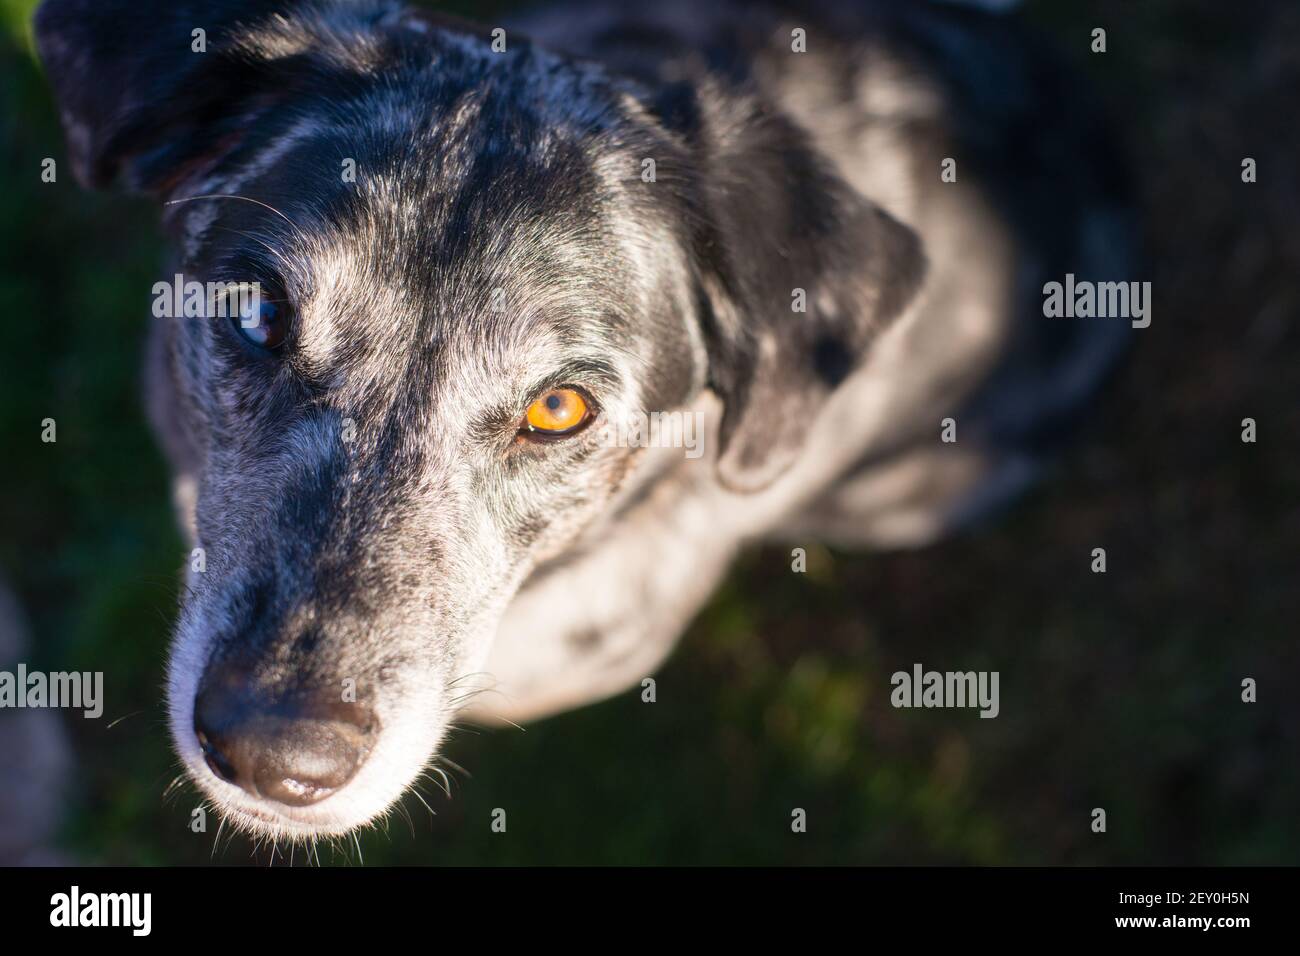 Bright Eyed Unique Looking Dog Canine Looks at Camera Stock Photo